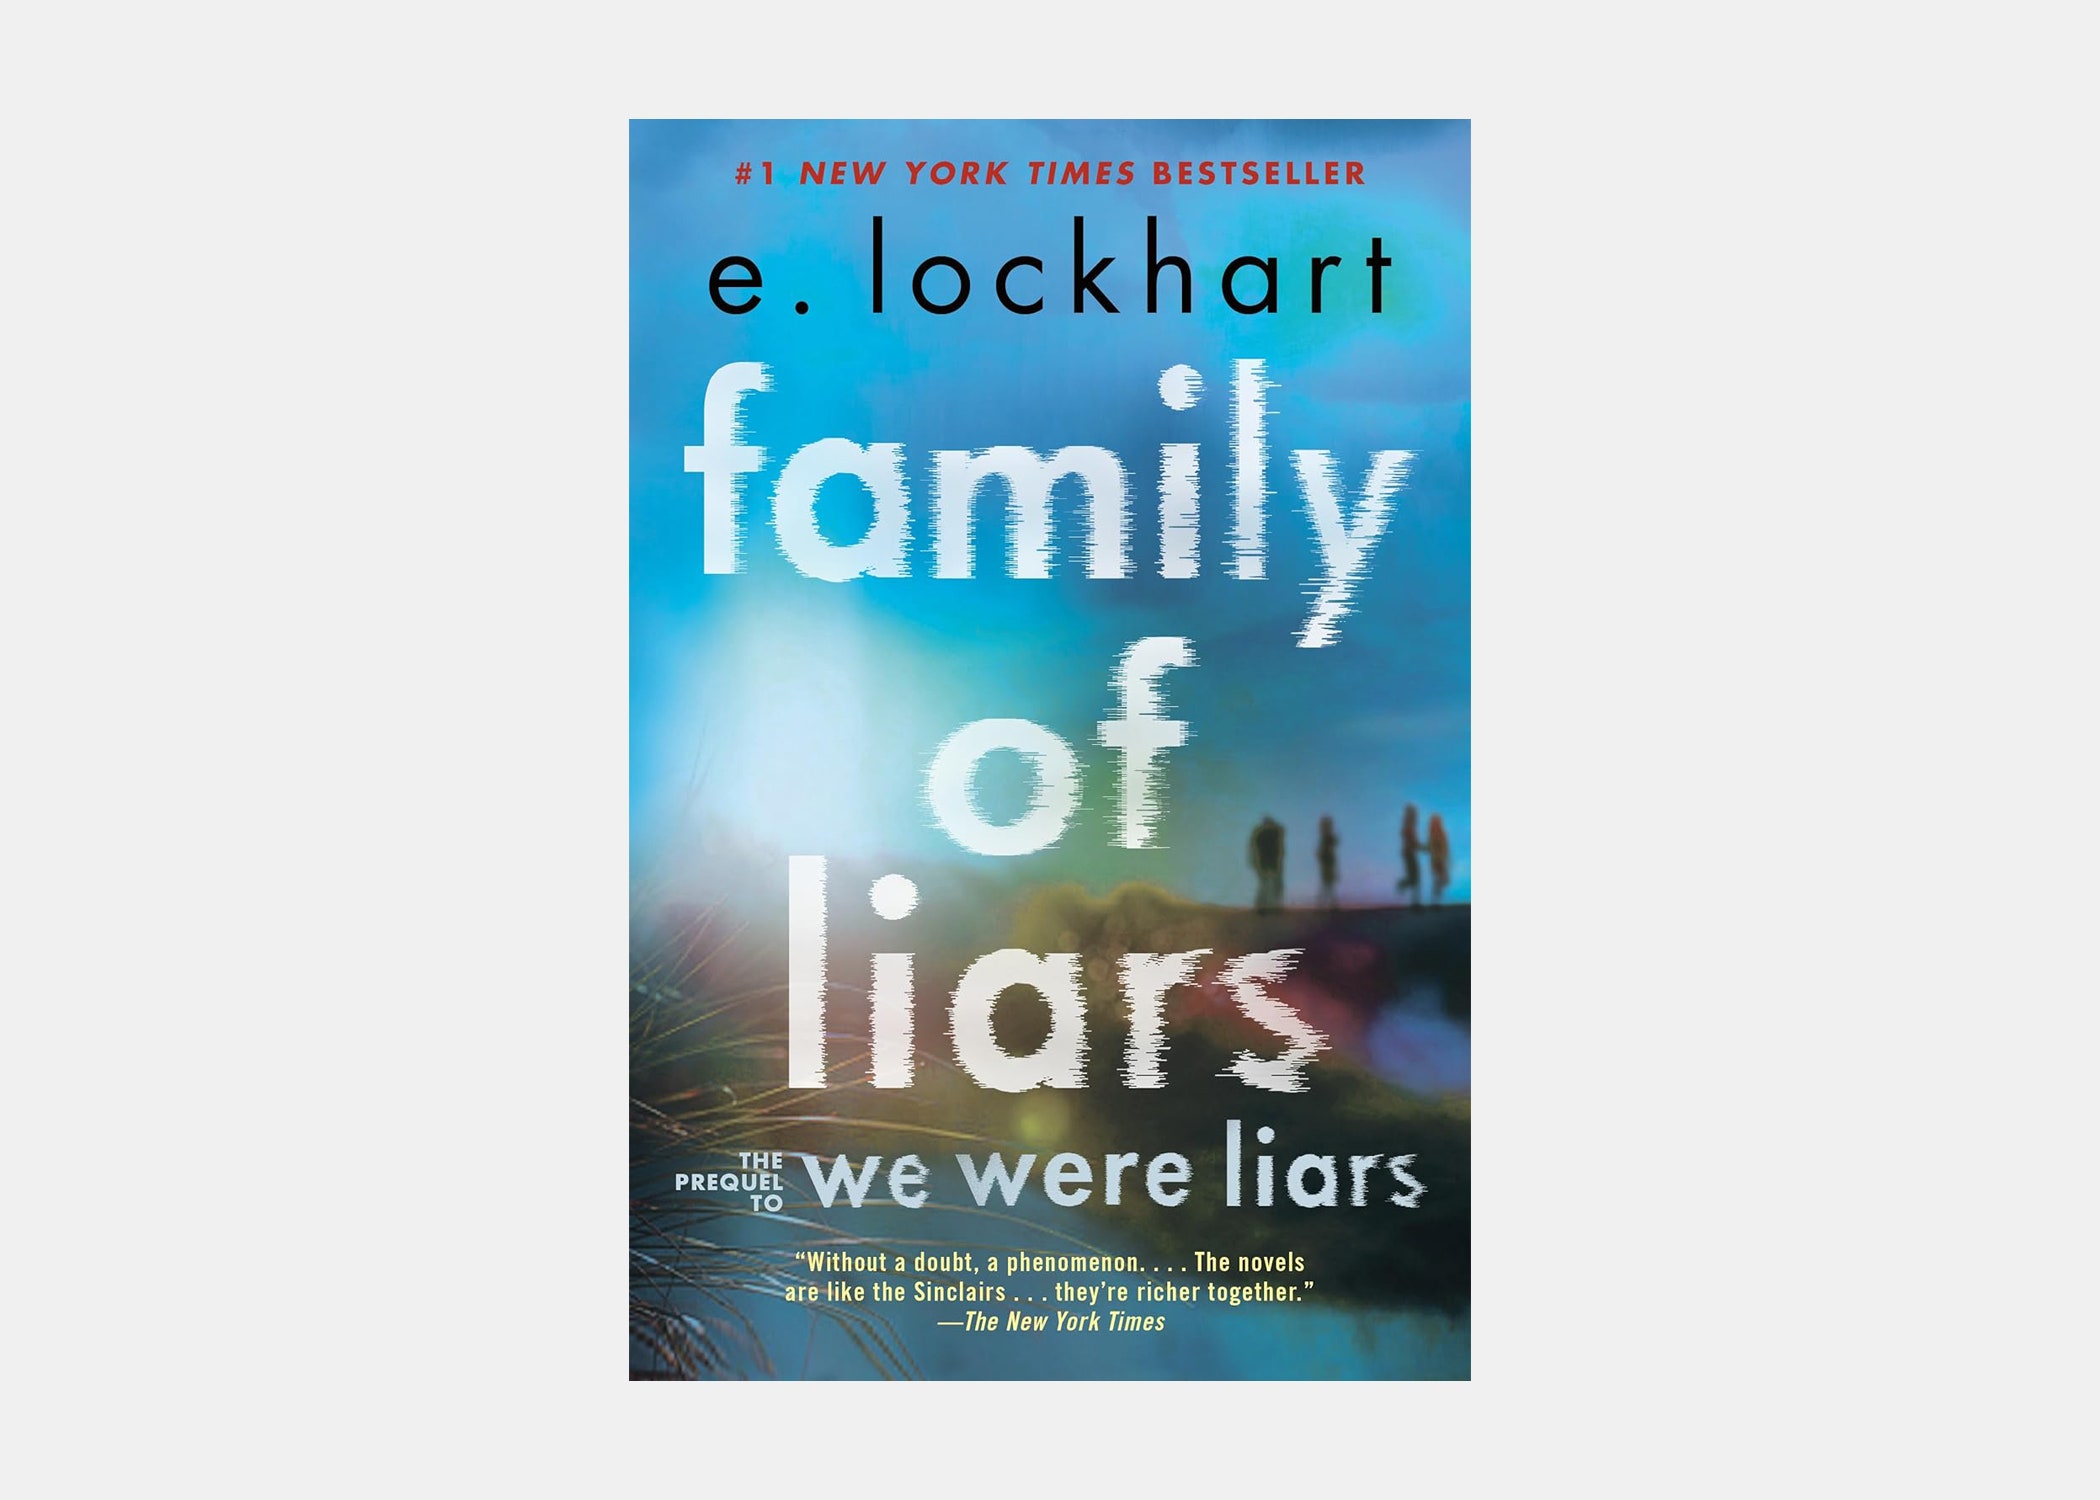 <p>Although these are two separate books, you’ll want to read them together on a long flight. <em>We Were Liars</em> is about what happens to a not-so-perfect family on their private island one summer. The prequel is set decades before when the parents were teenagers themselves. It’s filled with secrets, deceit, and confusion that won’t become clear until the final chapters.</p> <p><strong>Page count (both books):</strong> 496</p> <p><strong>Average read time:</strong> 7 hours and 4 minutes</p> $9, Amazon. <a href="https://www.amazon.com/Family-Liars-Prequel-We-Were/dp/0593485882/ref=sr_1_1?">Get it now!</a><p>Sign up to receive the latest news, expert tips, and inspiration on all things travel</p><a href="https://www.cntraveler.com/newsletter/the-daily?sourceCode=msnsend">Inspire Me</a>